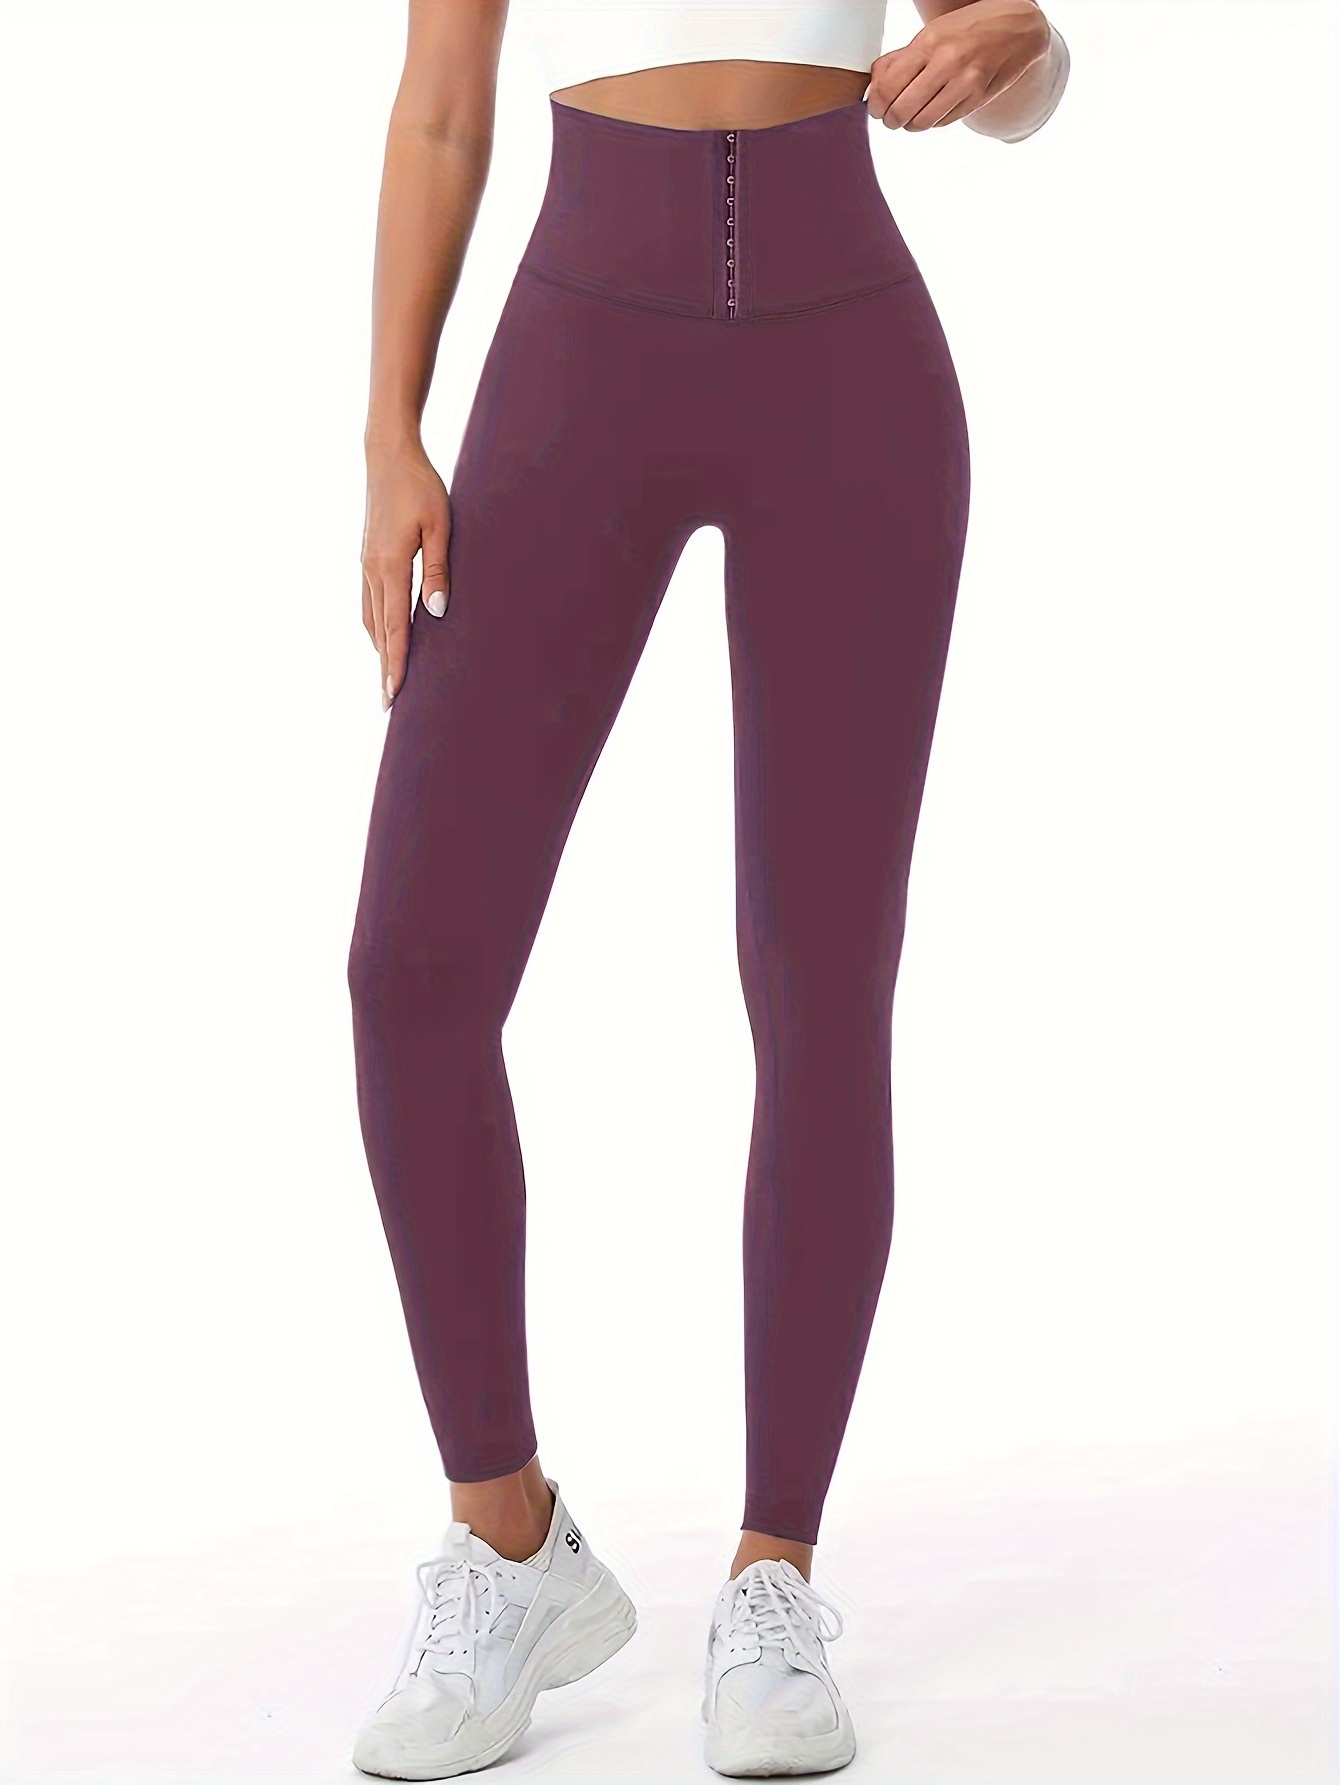 SOLD OUT bombshell sports wear leggings Thigh Highs Solid MAROON medium 